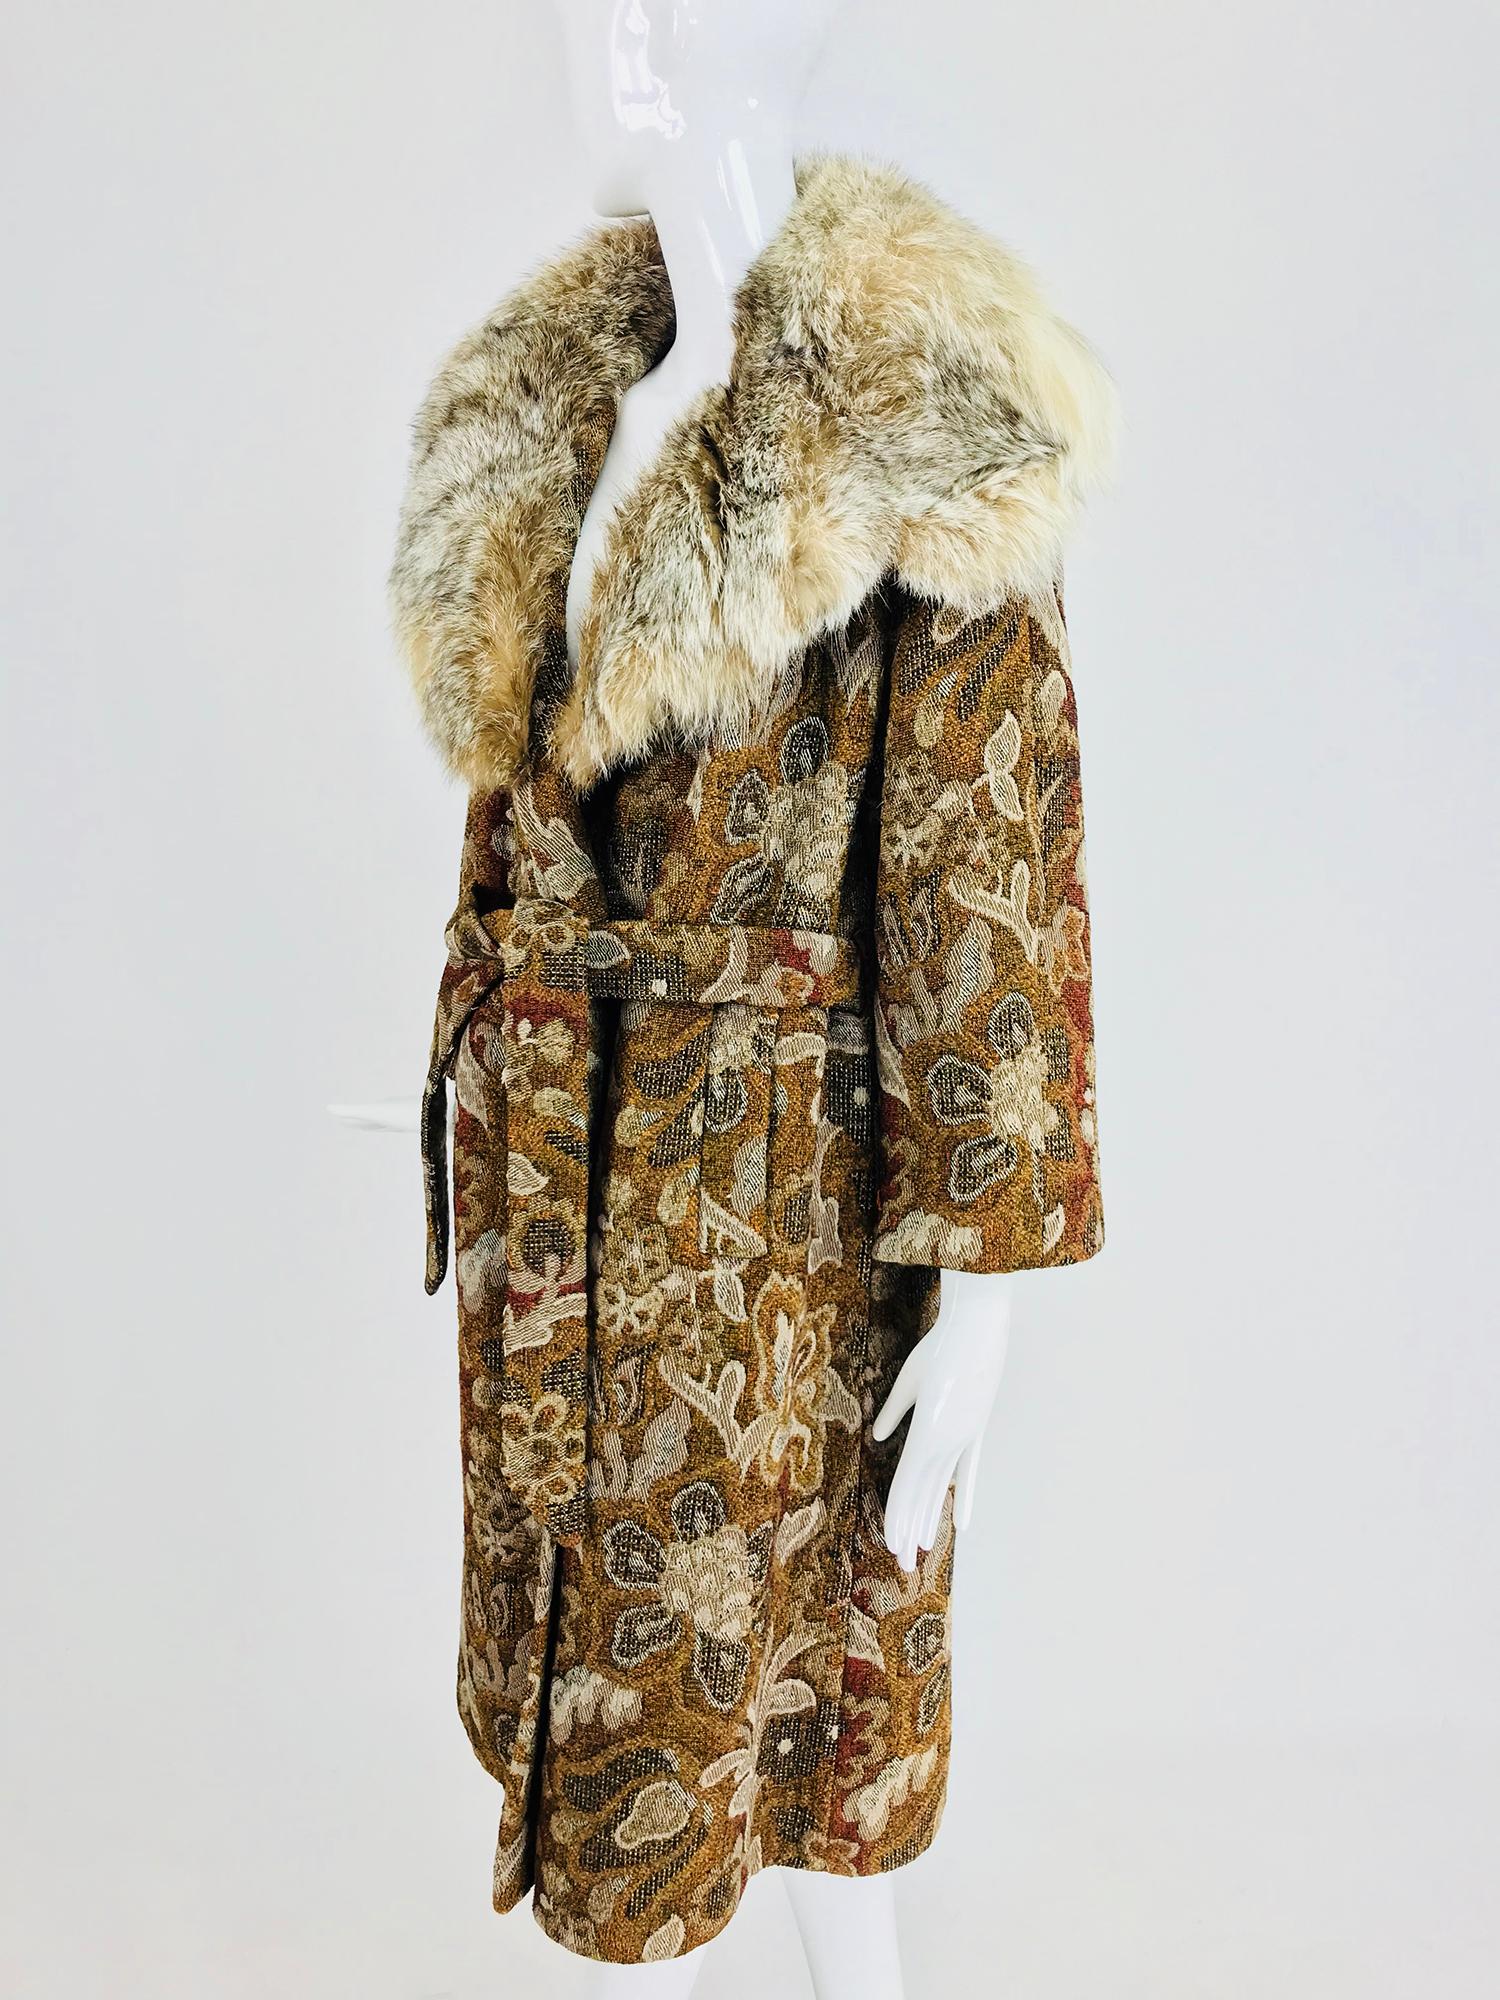 Tapestry coat with fur collar and wrap belt 1960s from Abraham & Straus NY. This tapestry coat woven in autumn shades with a floral design and a deep lush fur collar is sure to keep you warm on the coldest days. The coat has a tent shape and closes